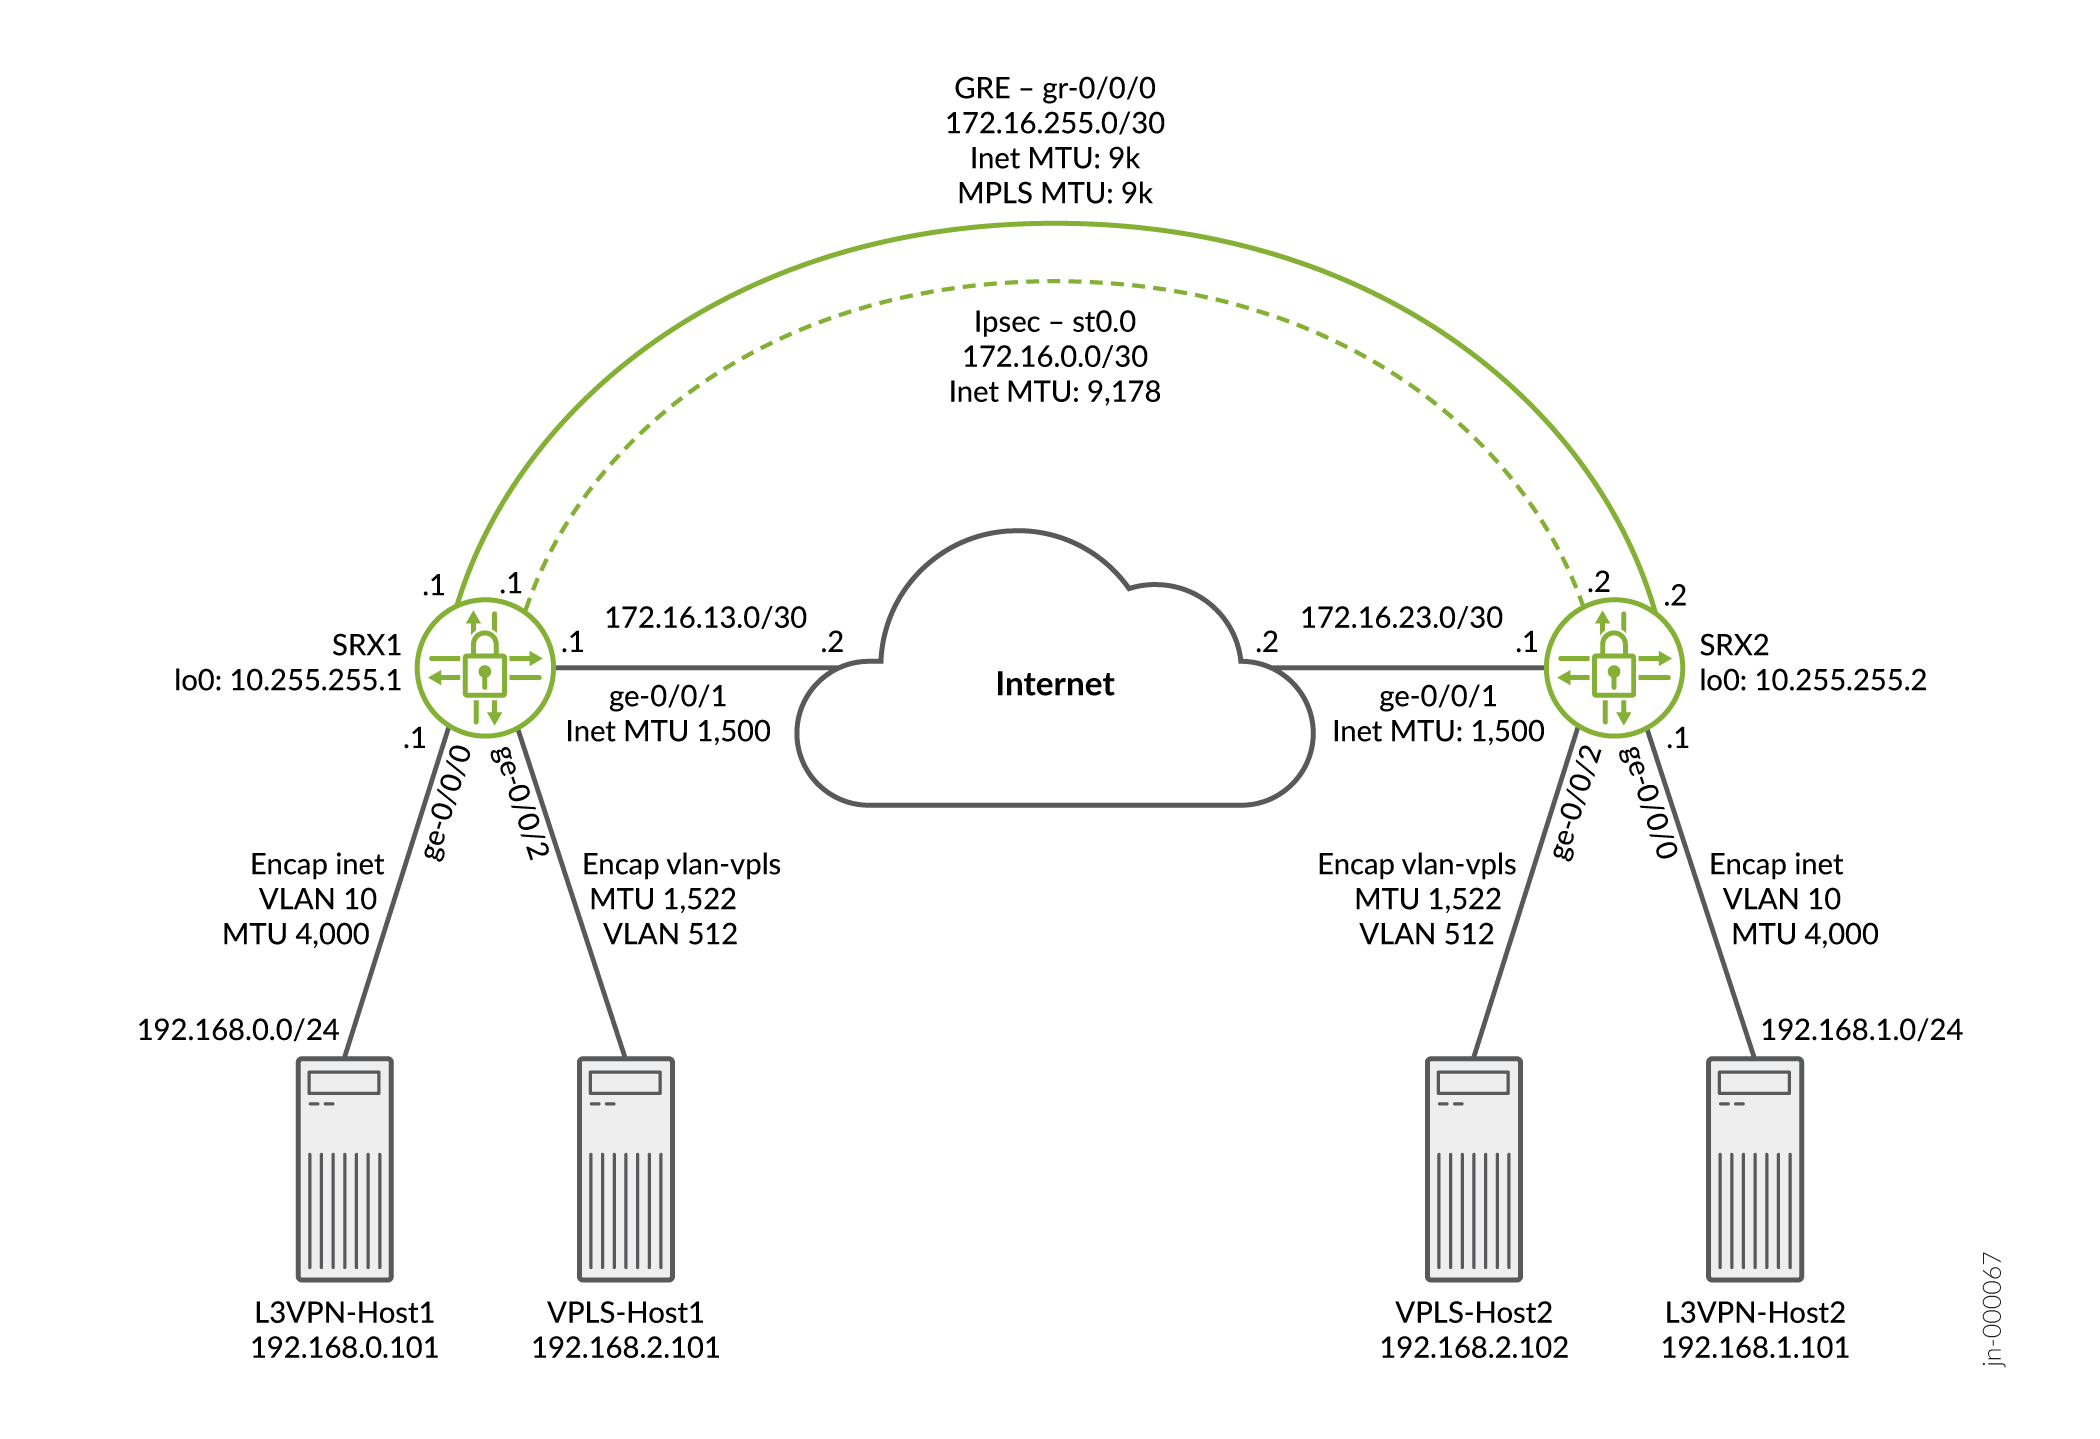 mpls vpns over ip tunnels to towers